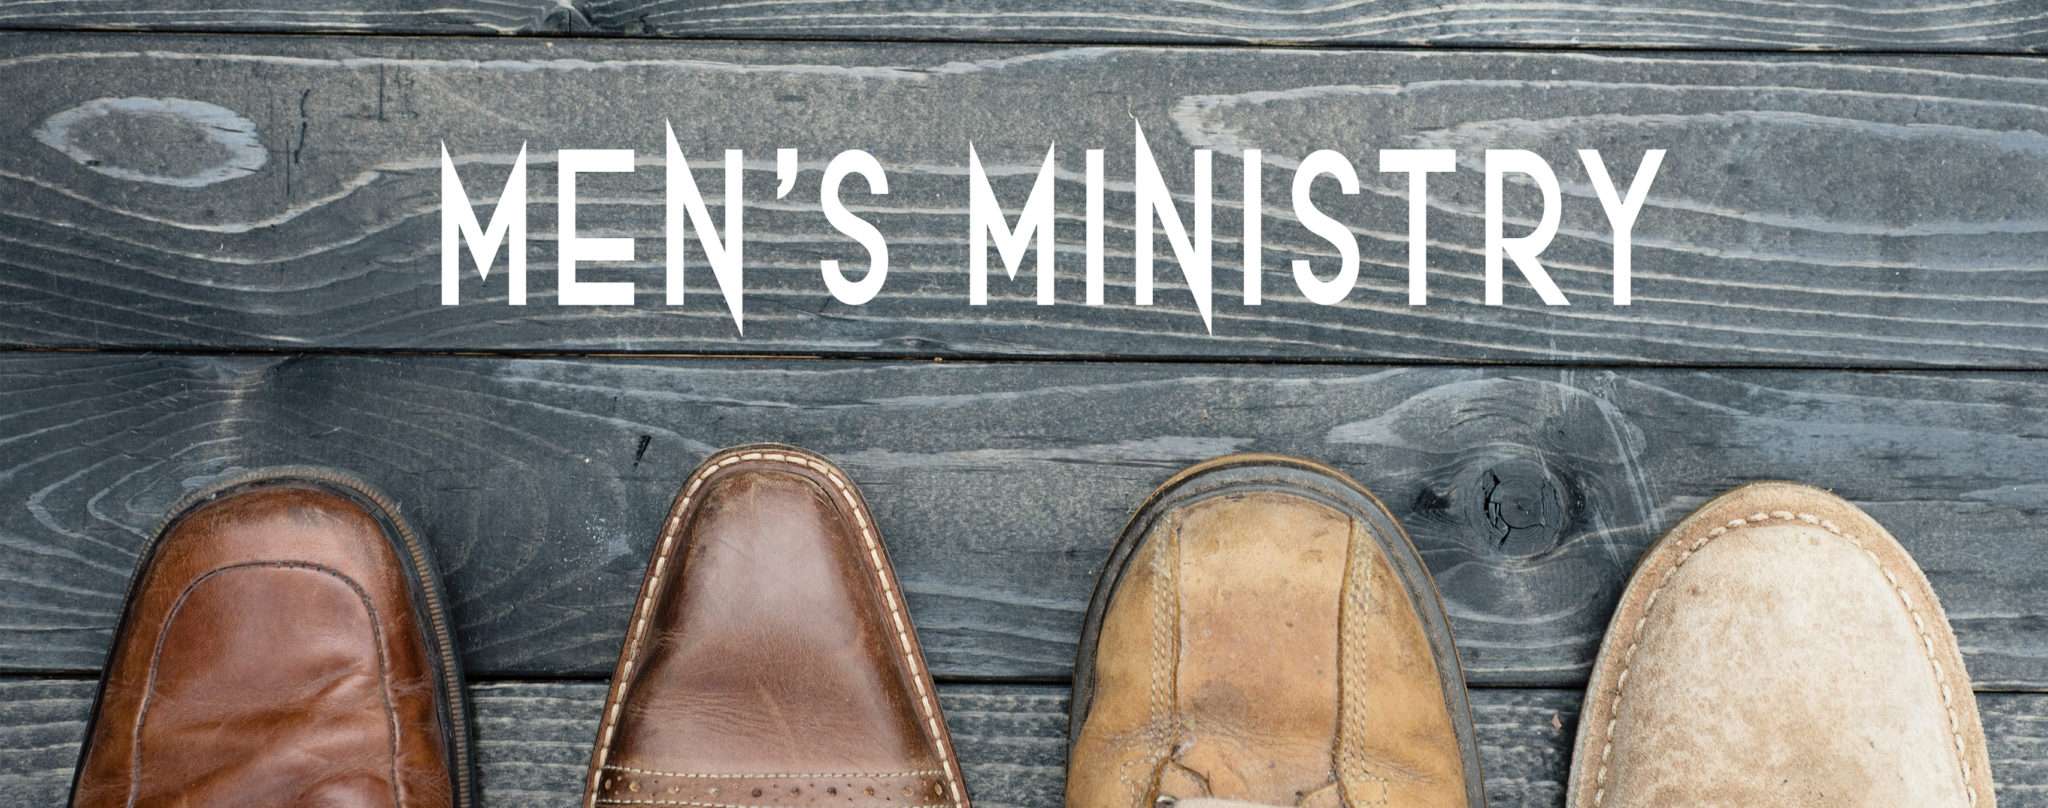 What Is The Need Of Men's Ministry In Churches?